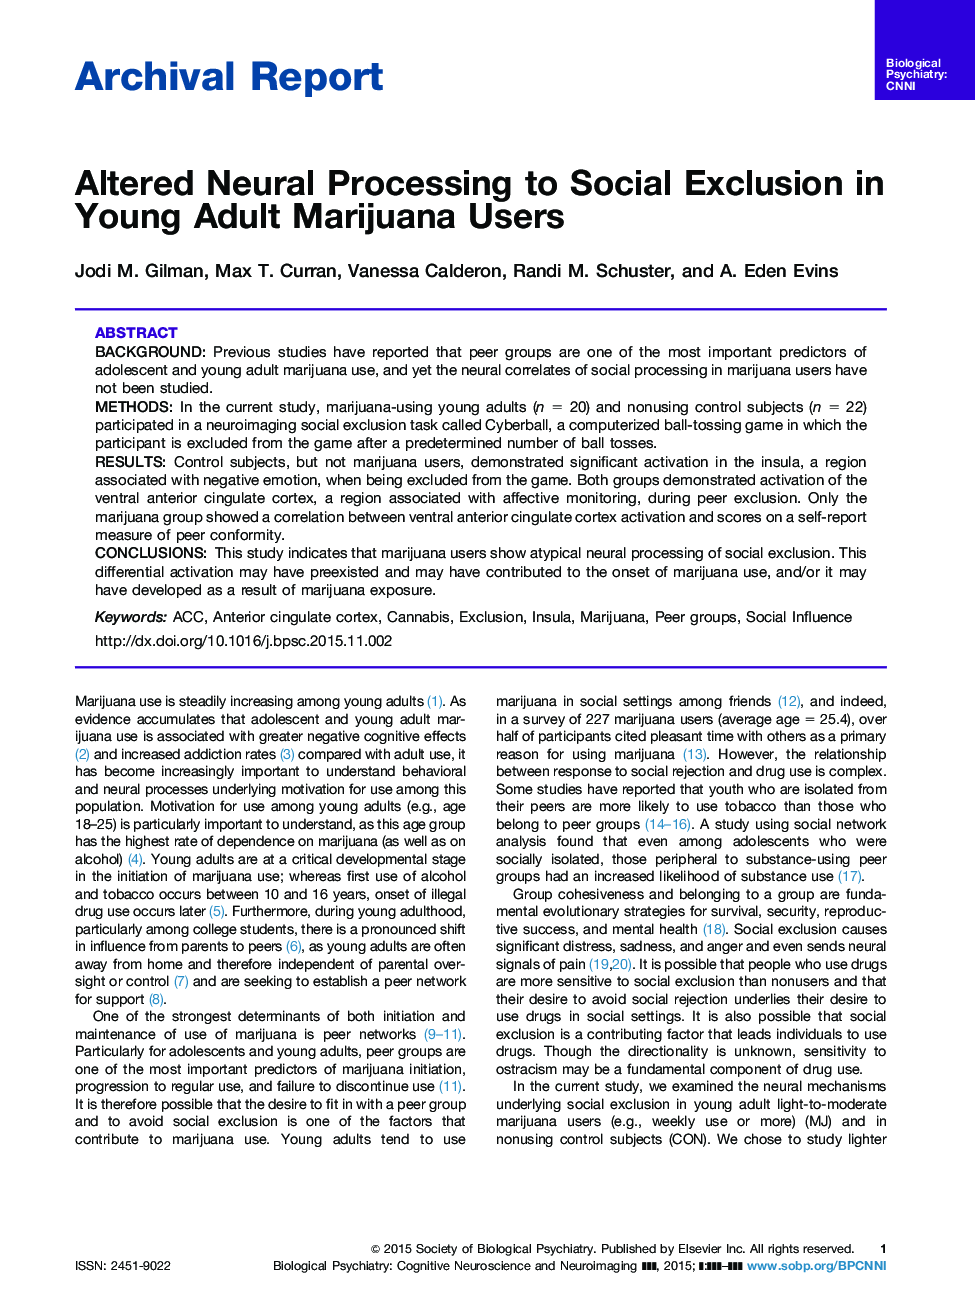 Altered Neural Processing to Social Exclusion in Young Adult Marijuana Users